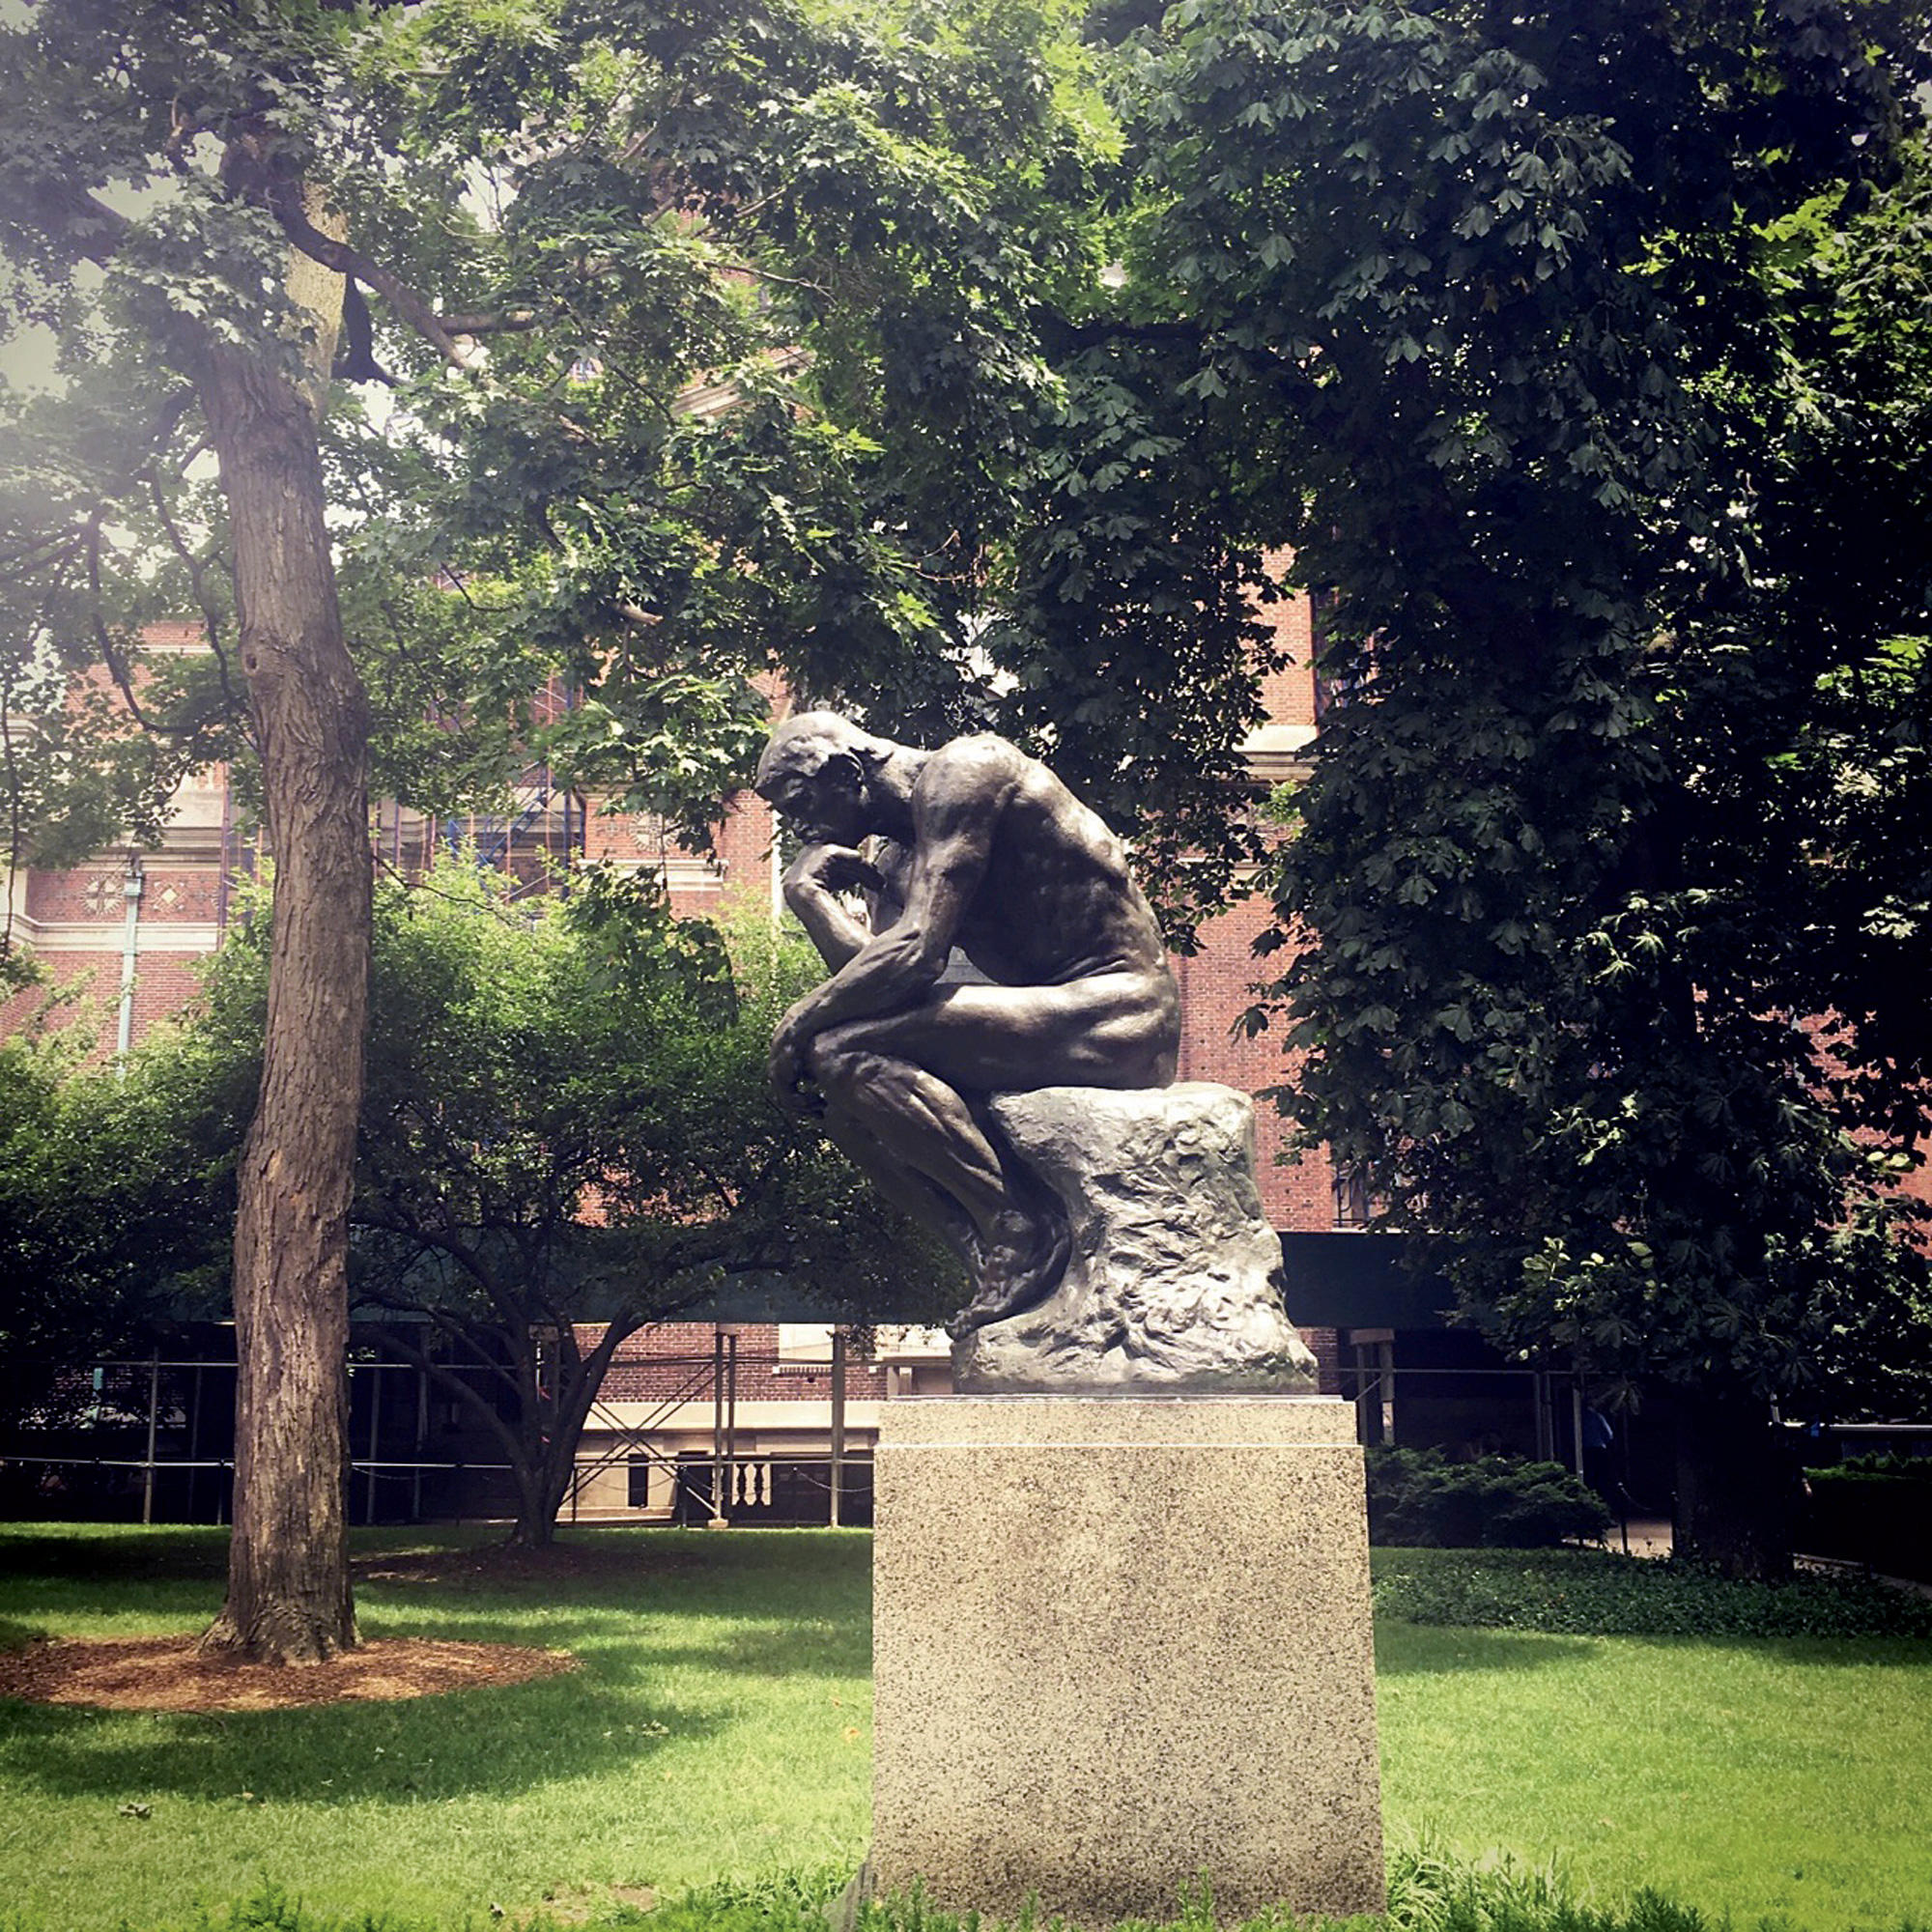 "The Thinker" statue at Columbia